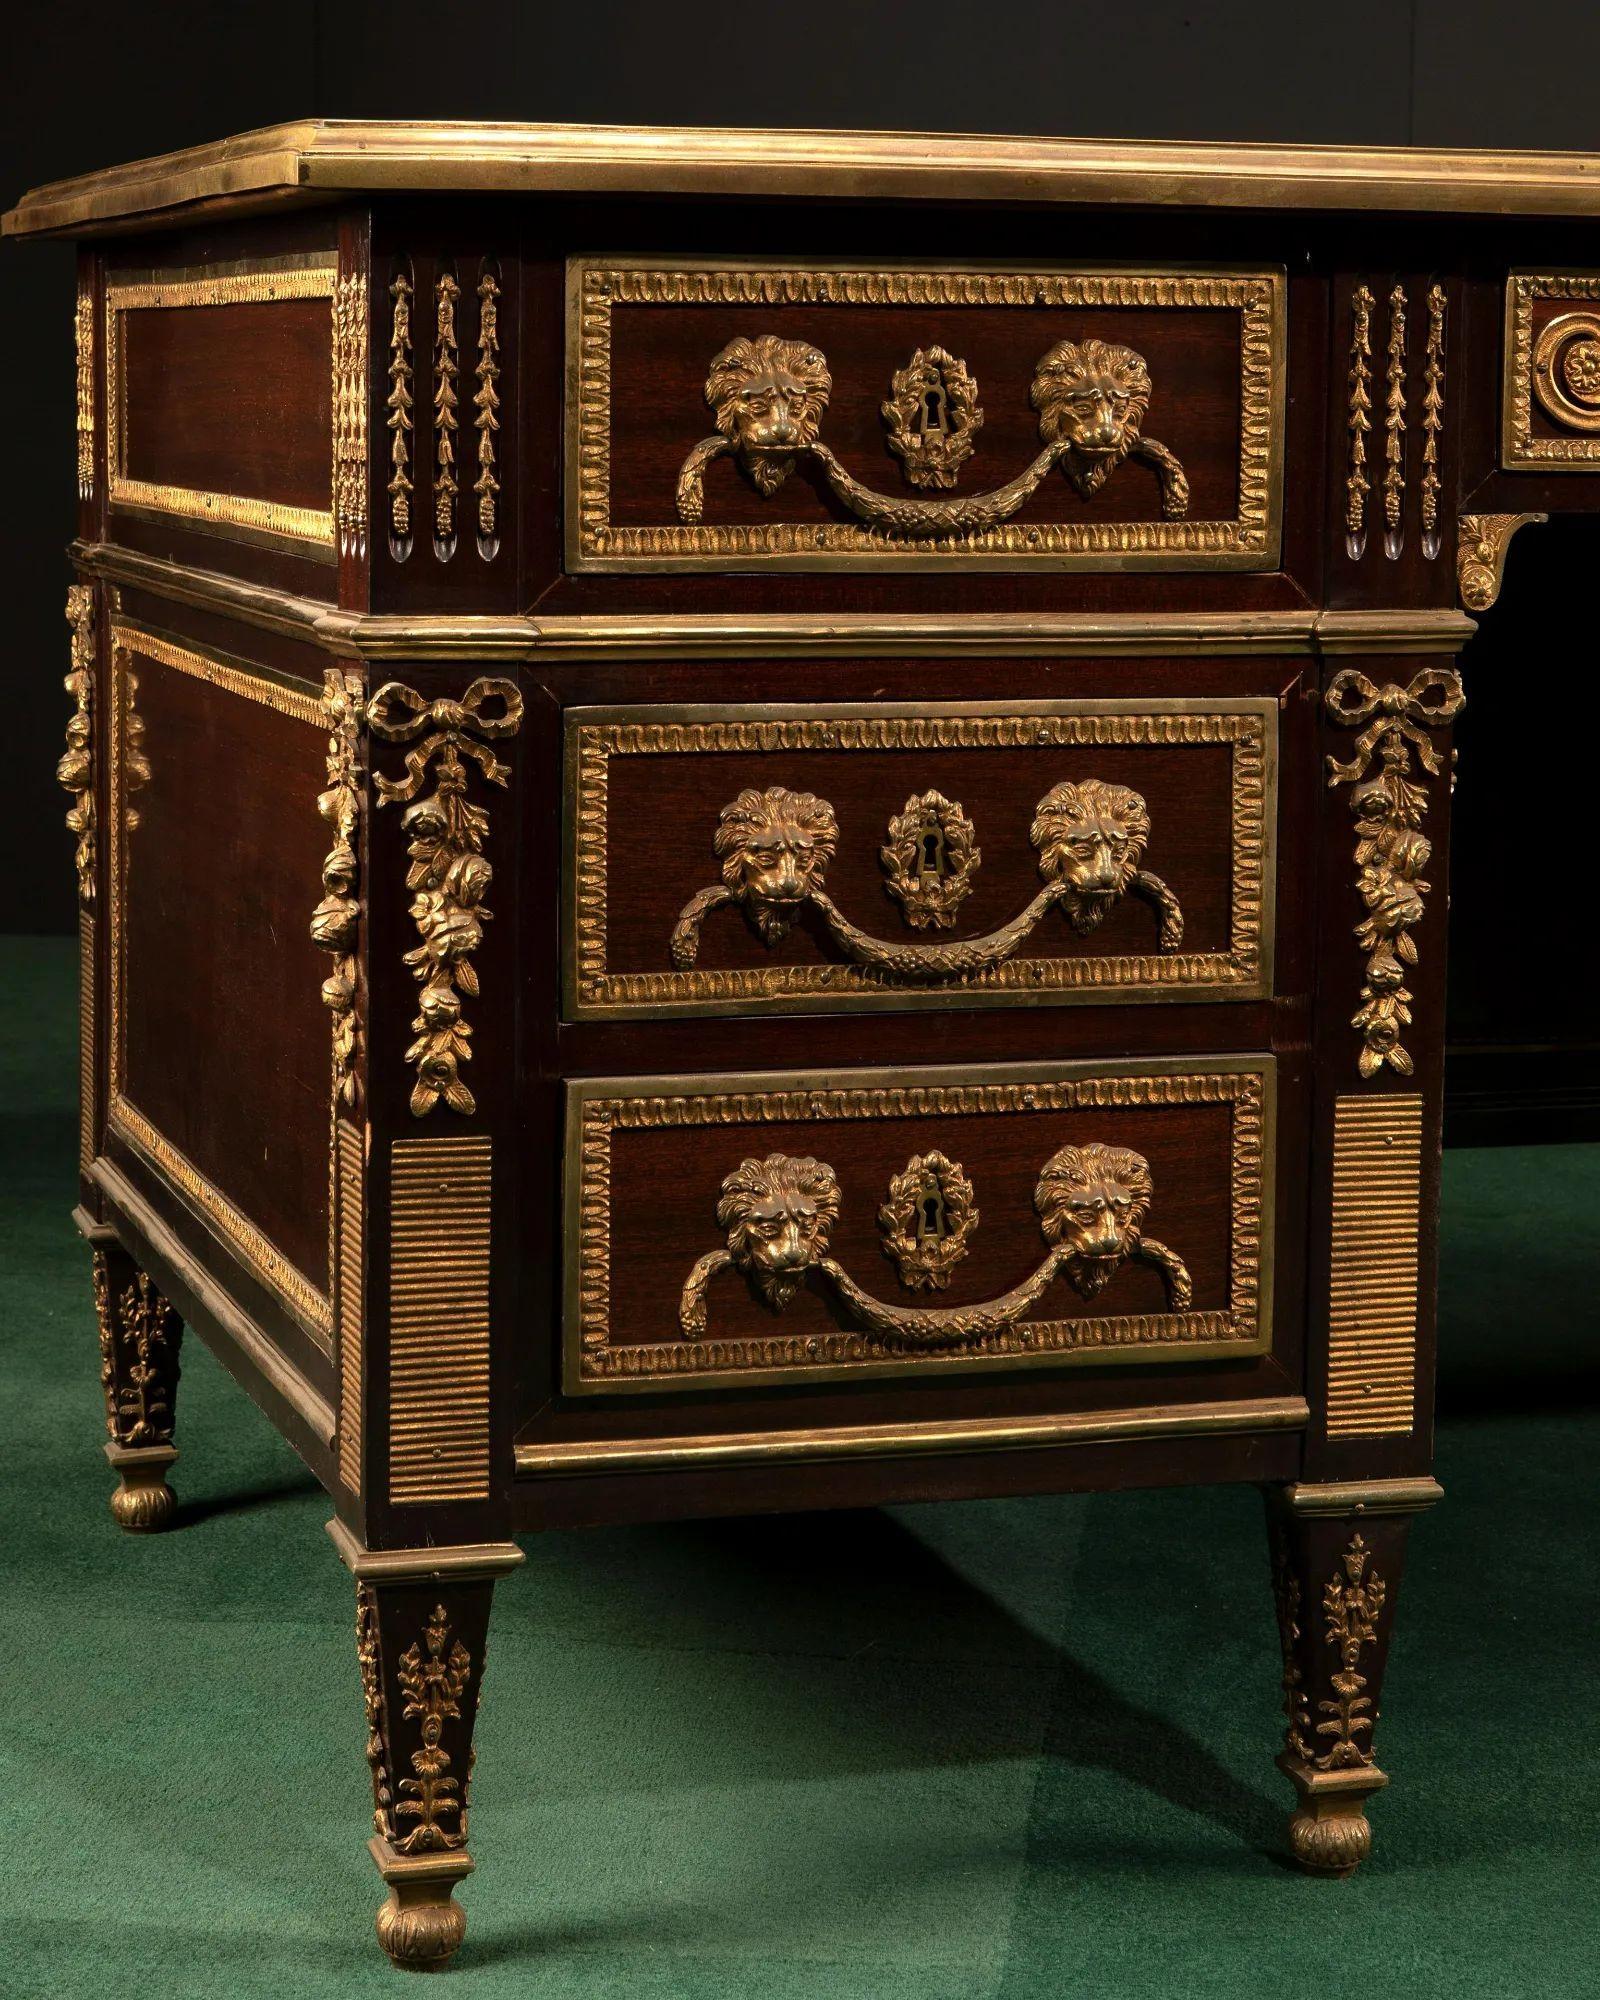 Mid-20th Century French Louis XVI-Style executive desk
 

Mahogany with excessive bronze mounts and trim with tooled dark leather writing surface.
 
Dimensions:
31